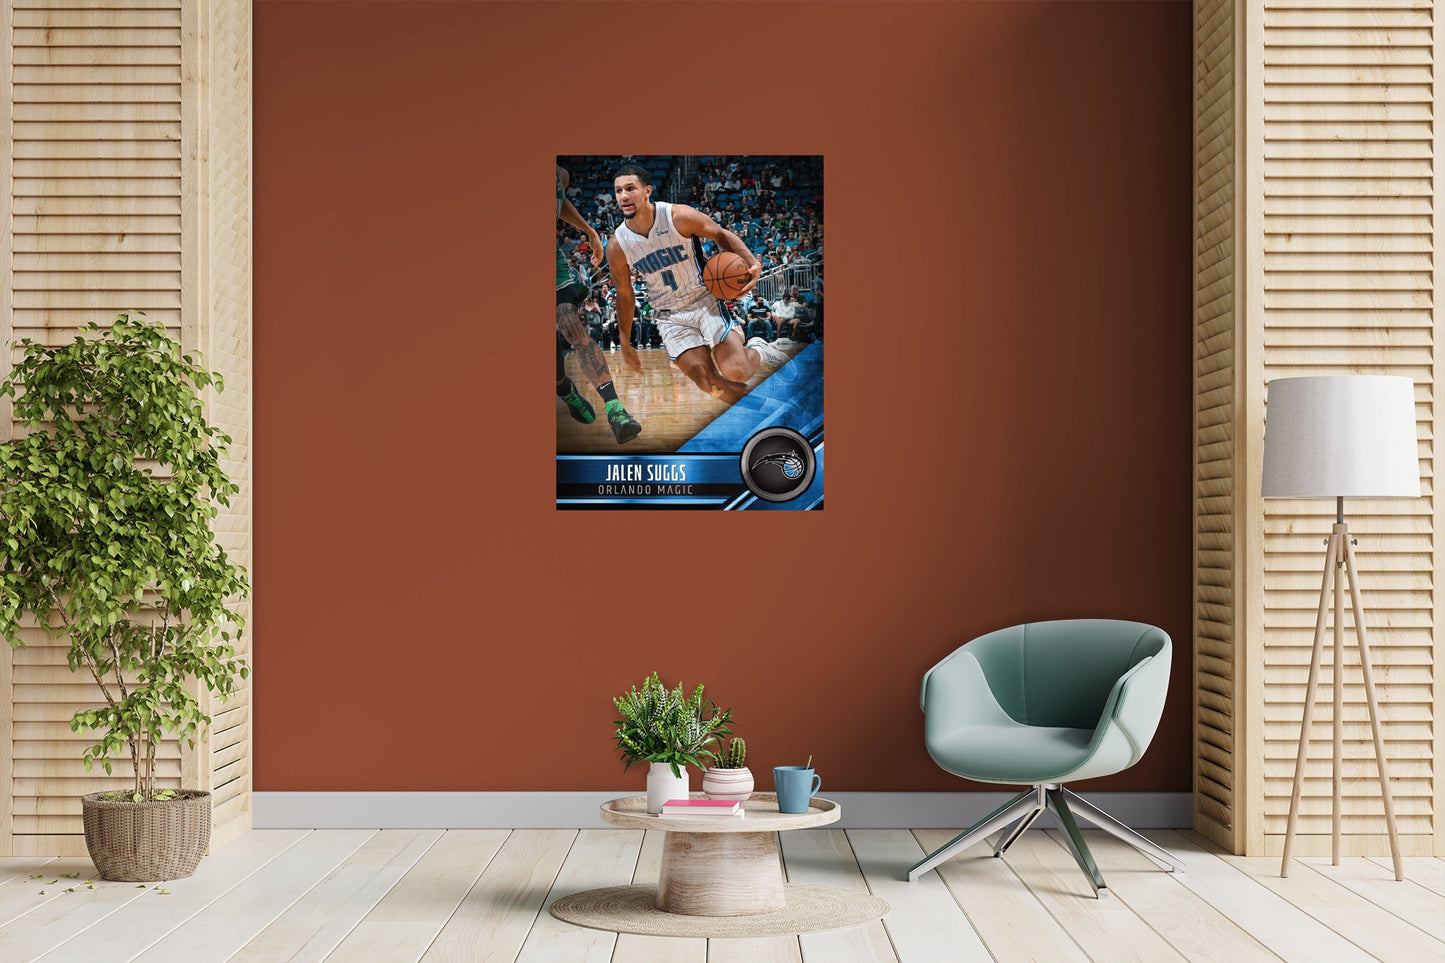 Orlando Magic: Jalen Suggs Poster - Officially Licensed NBA Removable Adhesive Decal